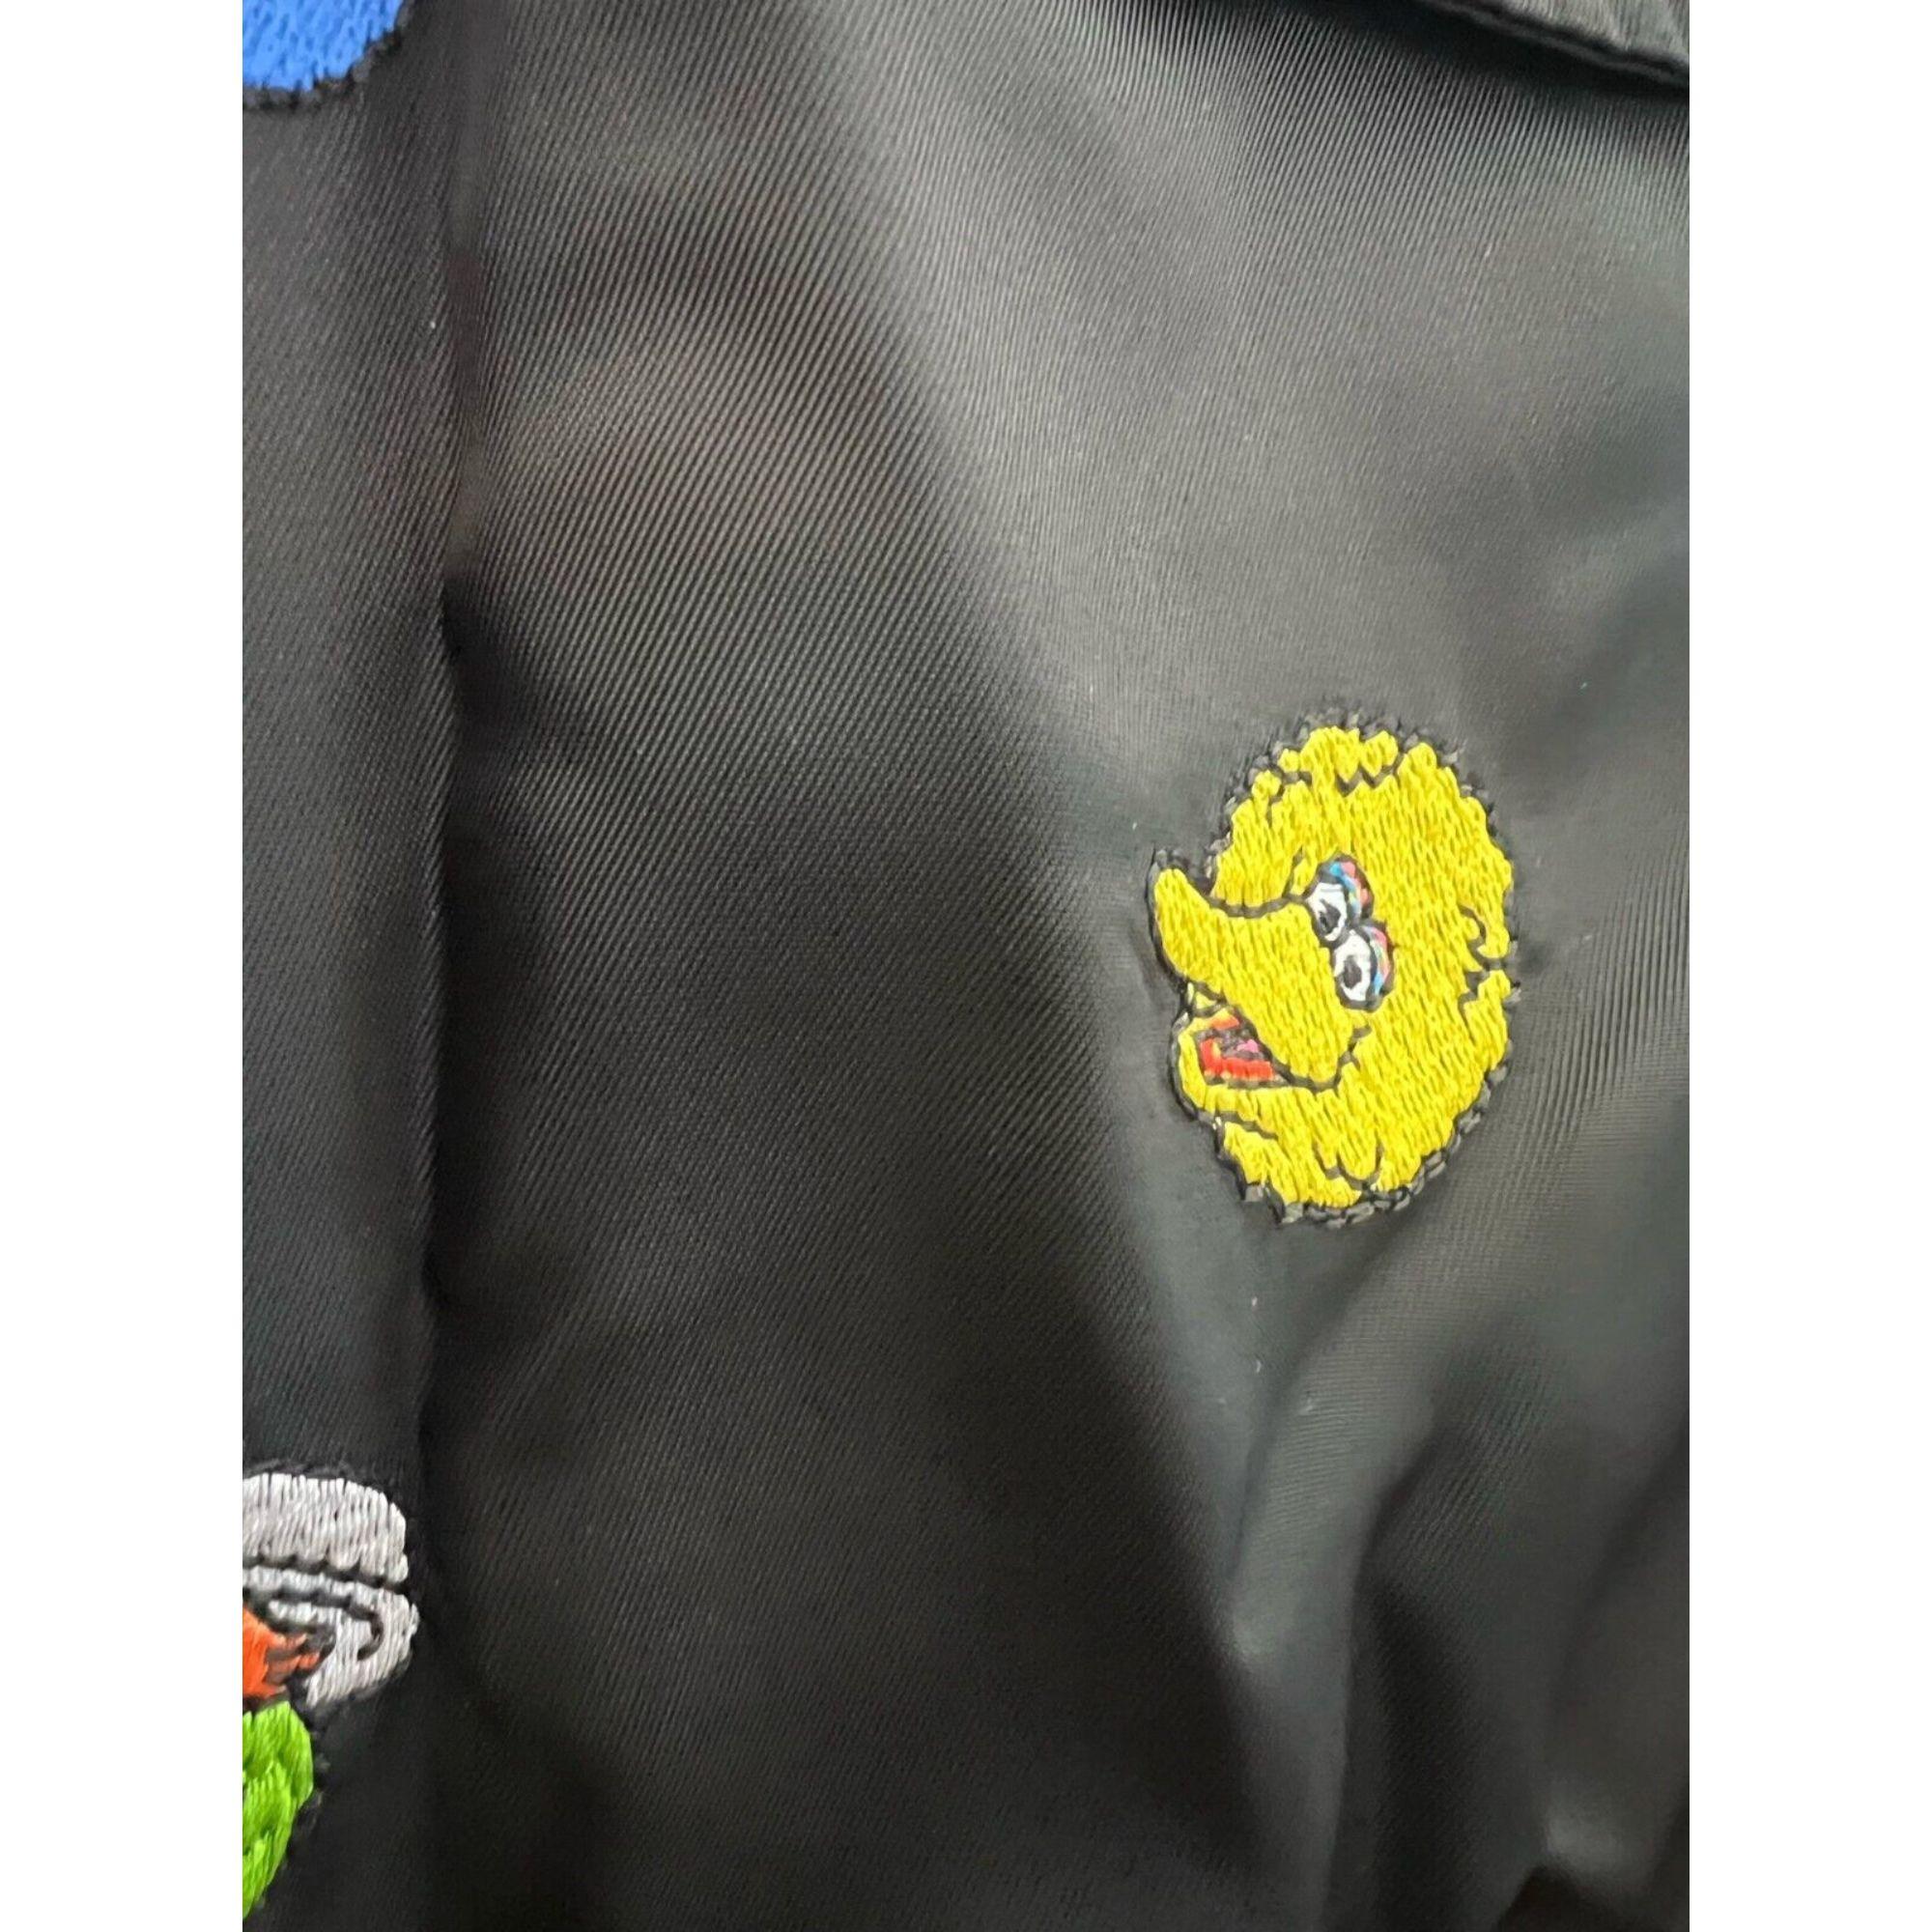 AW21 Moschino Couture Sesame Street Embroidered Hooded Jacket by Jeremy Scott For Sale 2